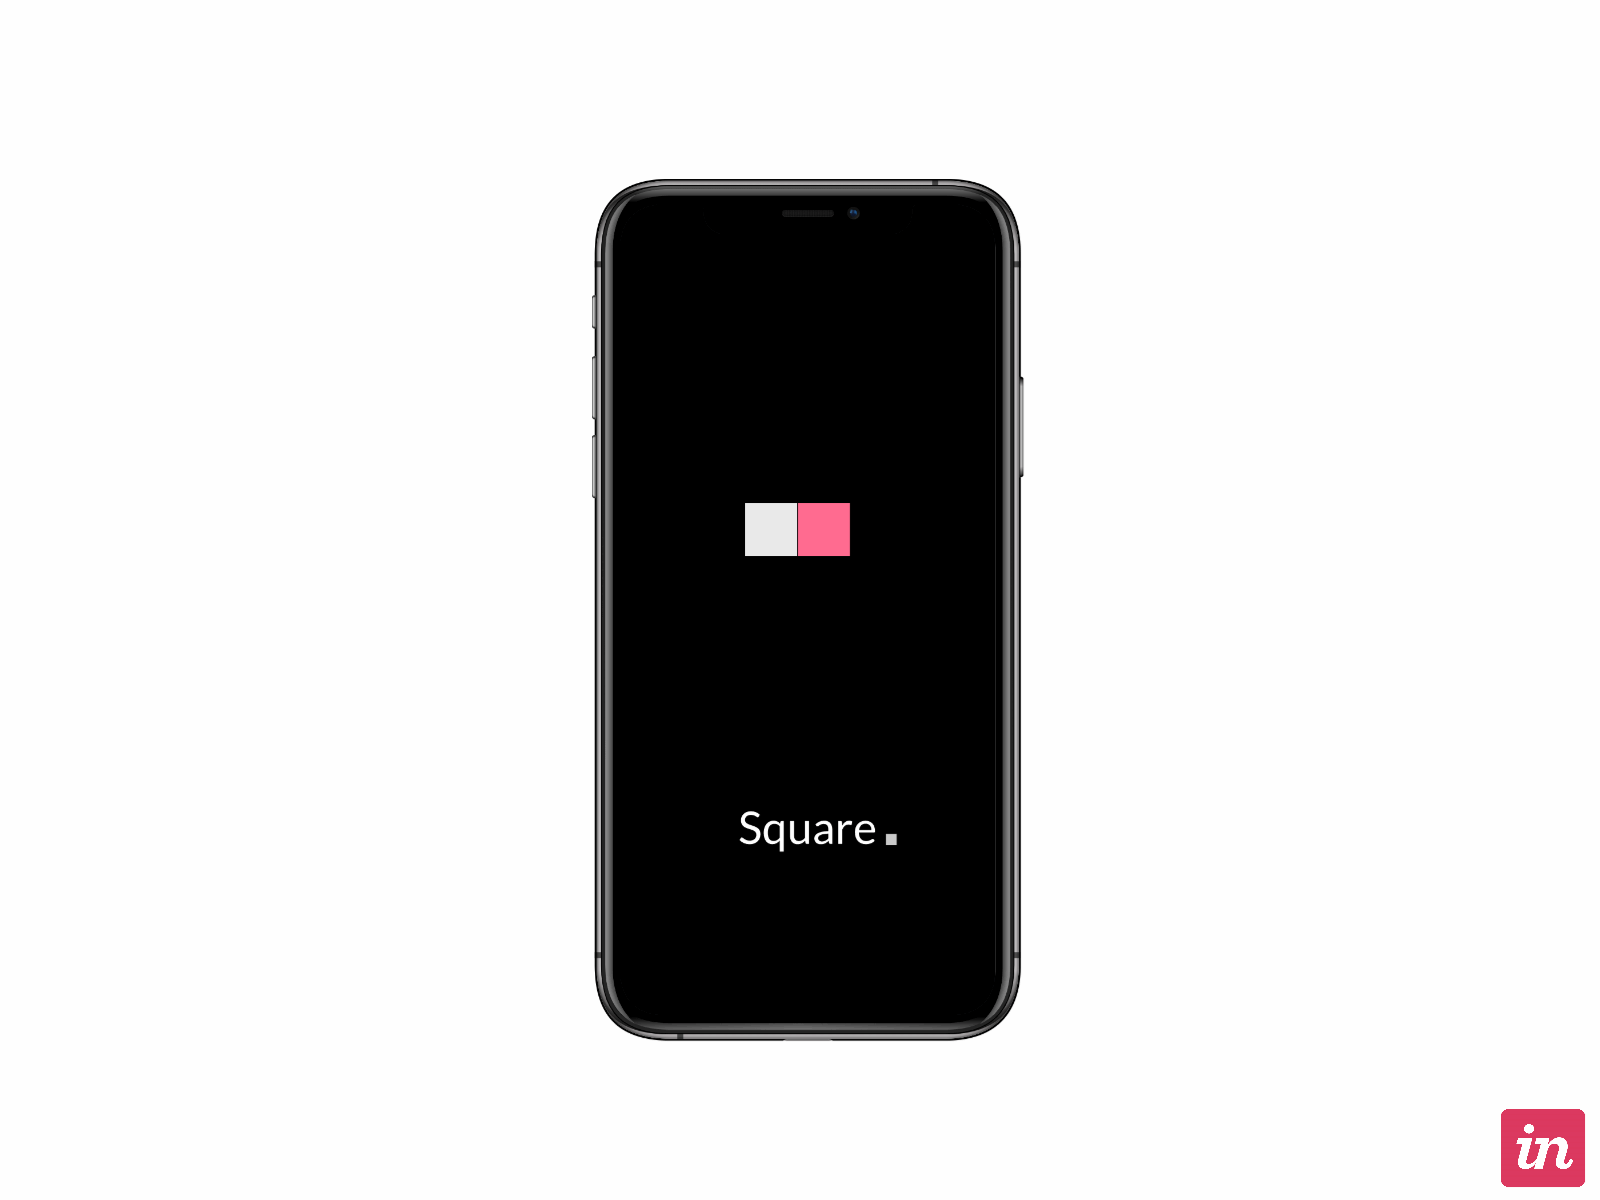 Square - onboarding screen